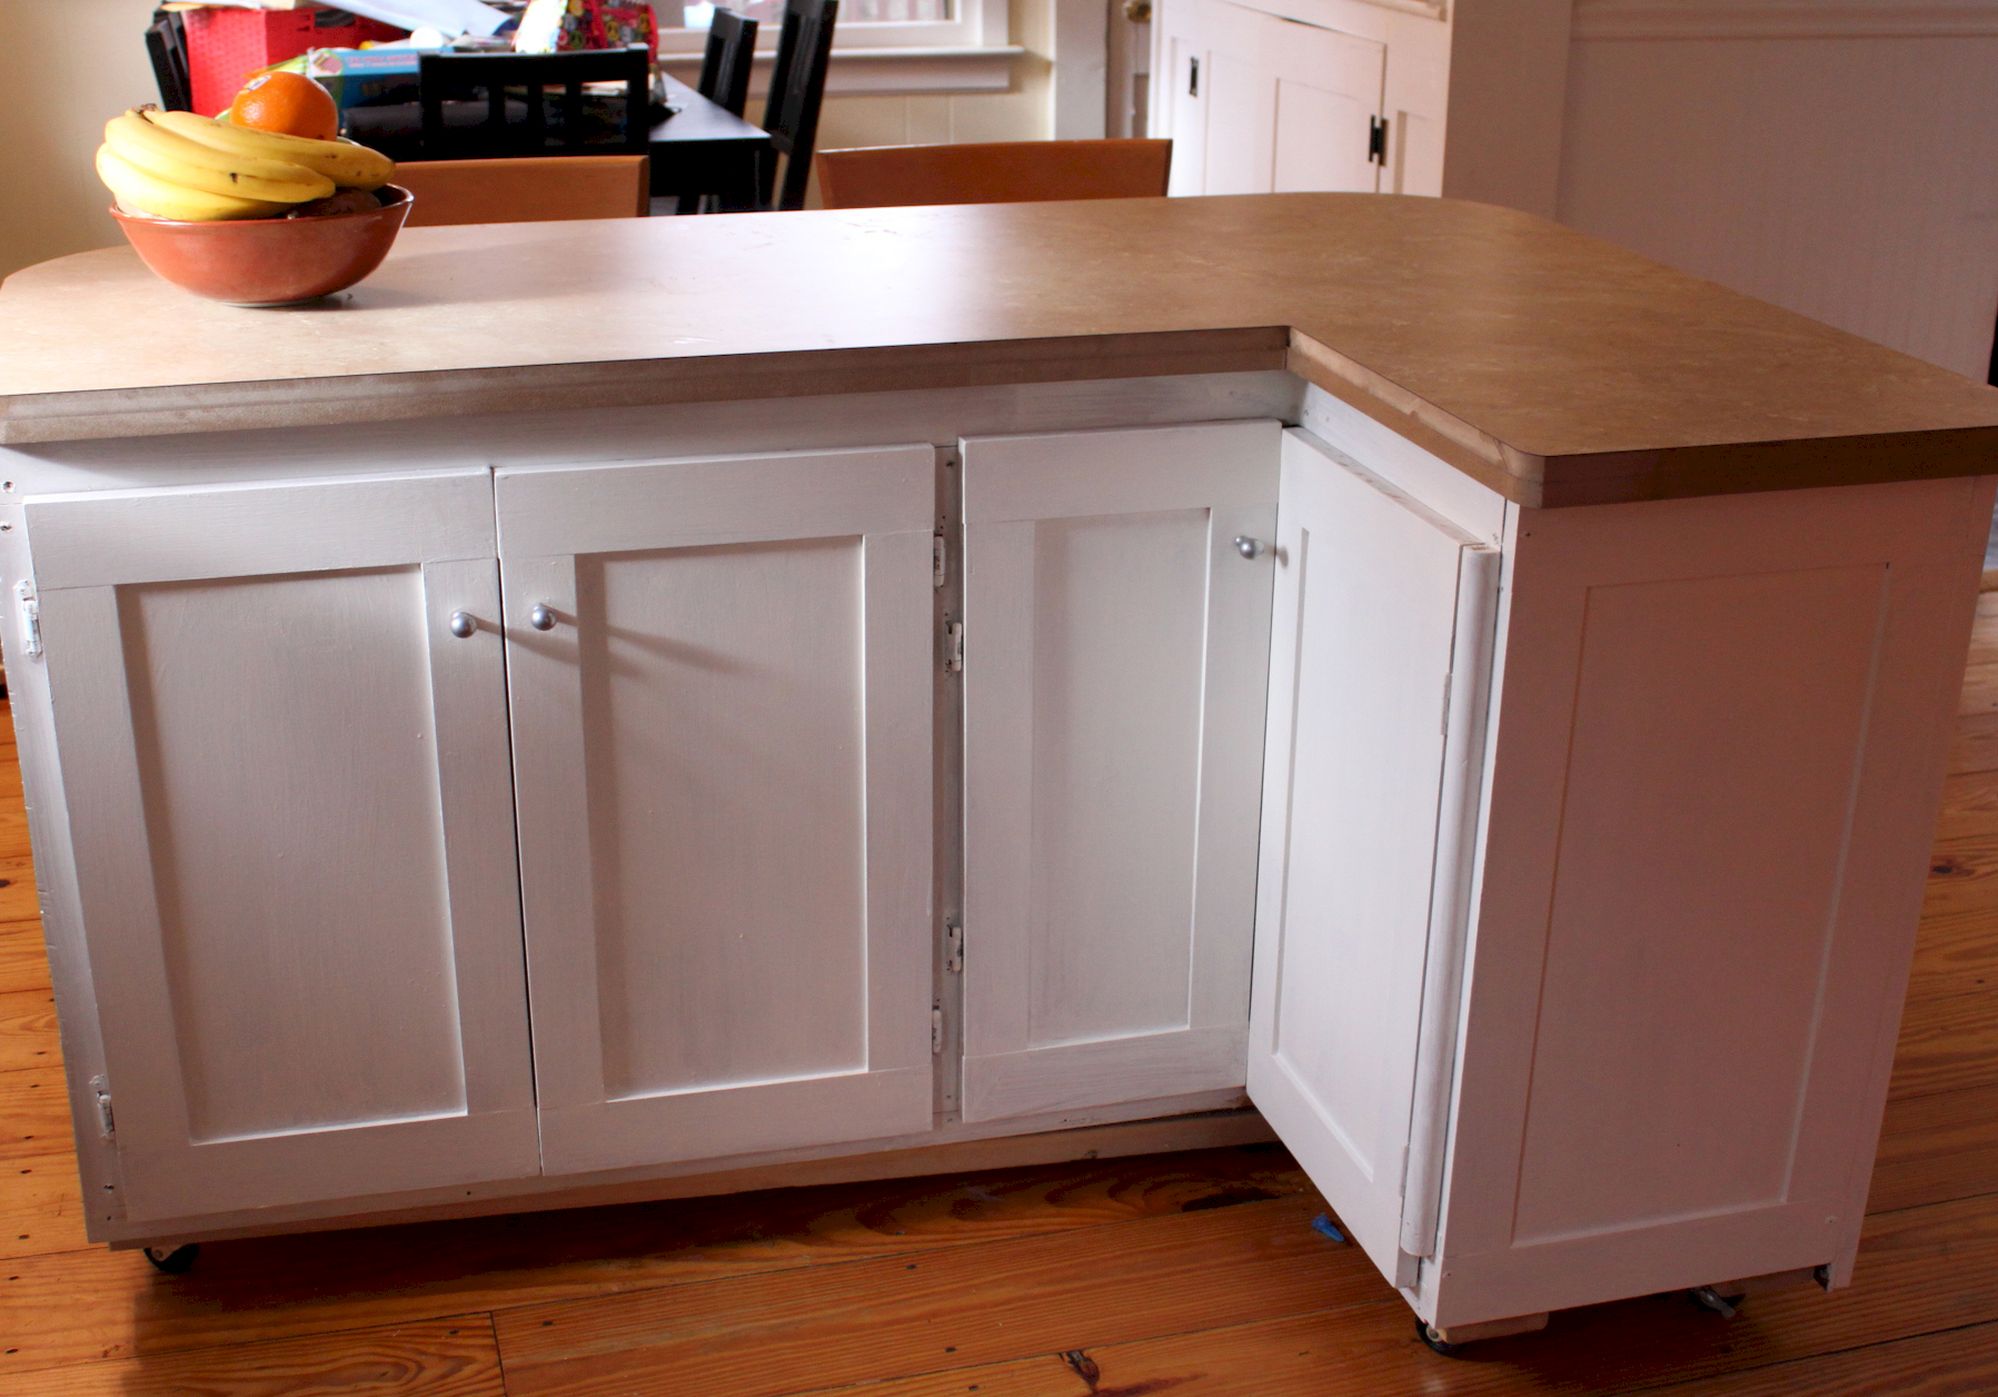 Movable Kitchen Islands With Seating photo - 5